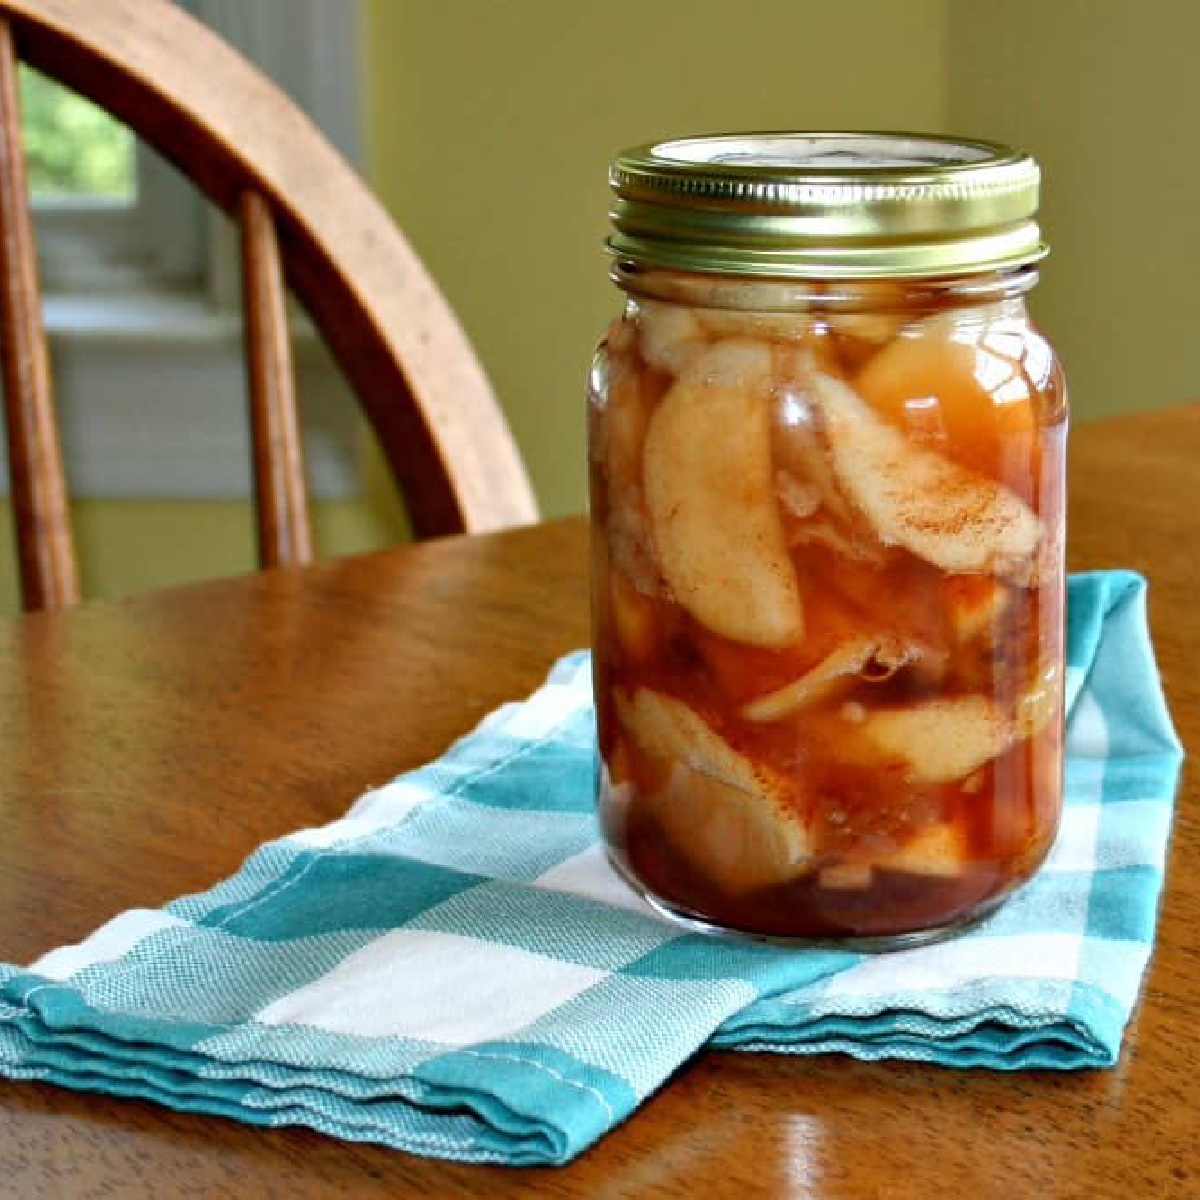 a jar of canned apples on a blue checked napkin sitting on a wooden kitchen table